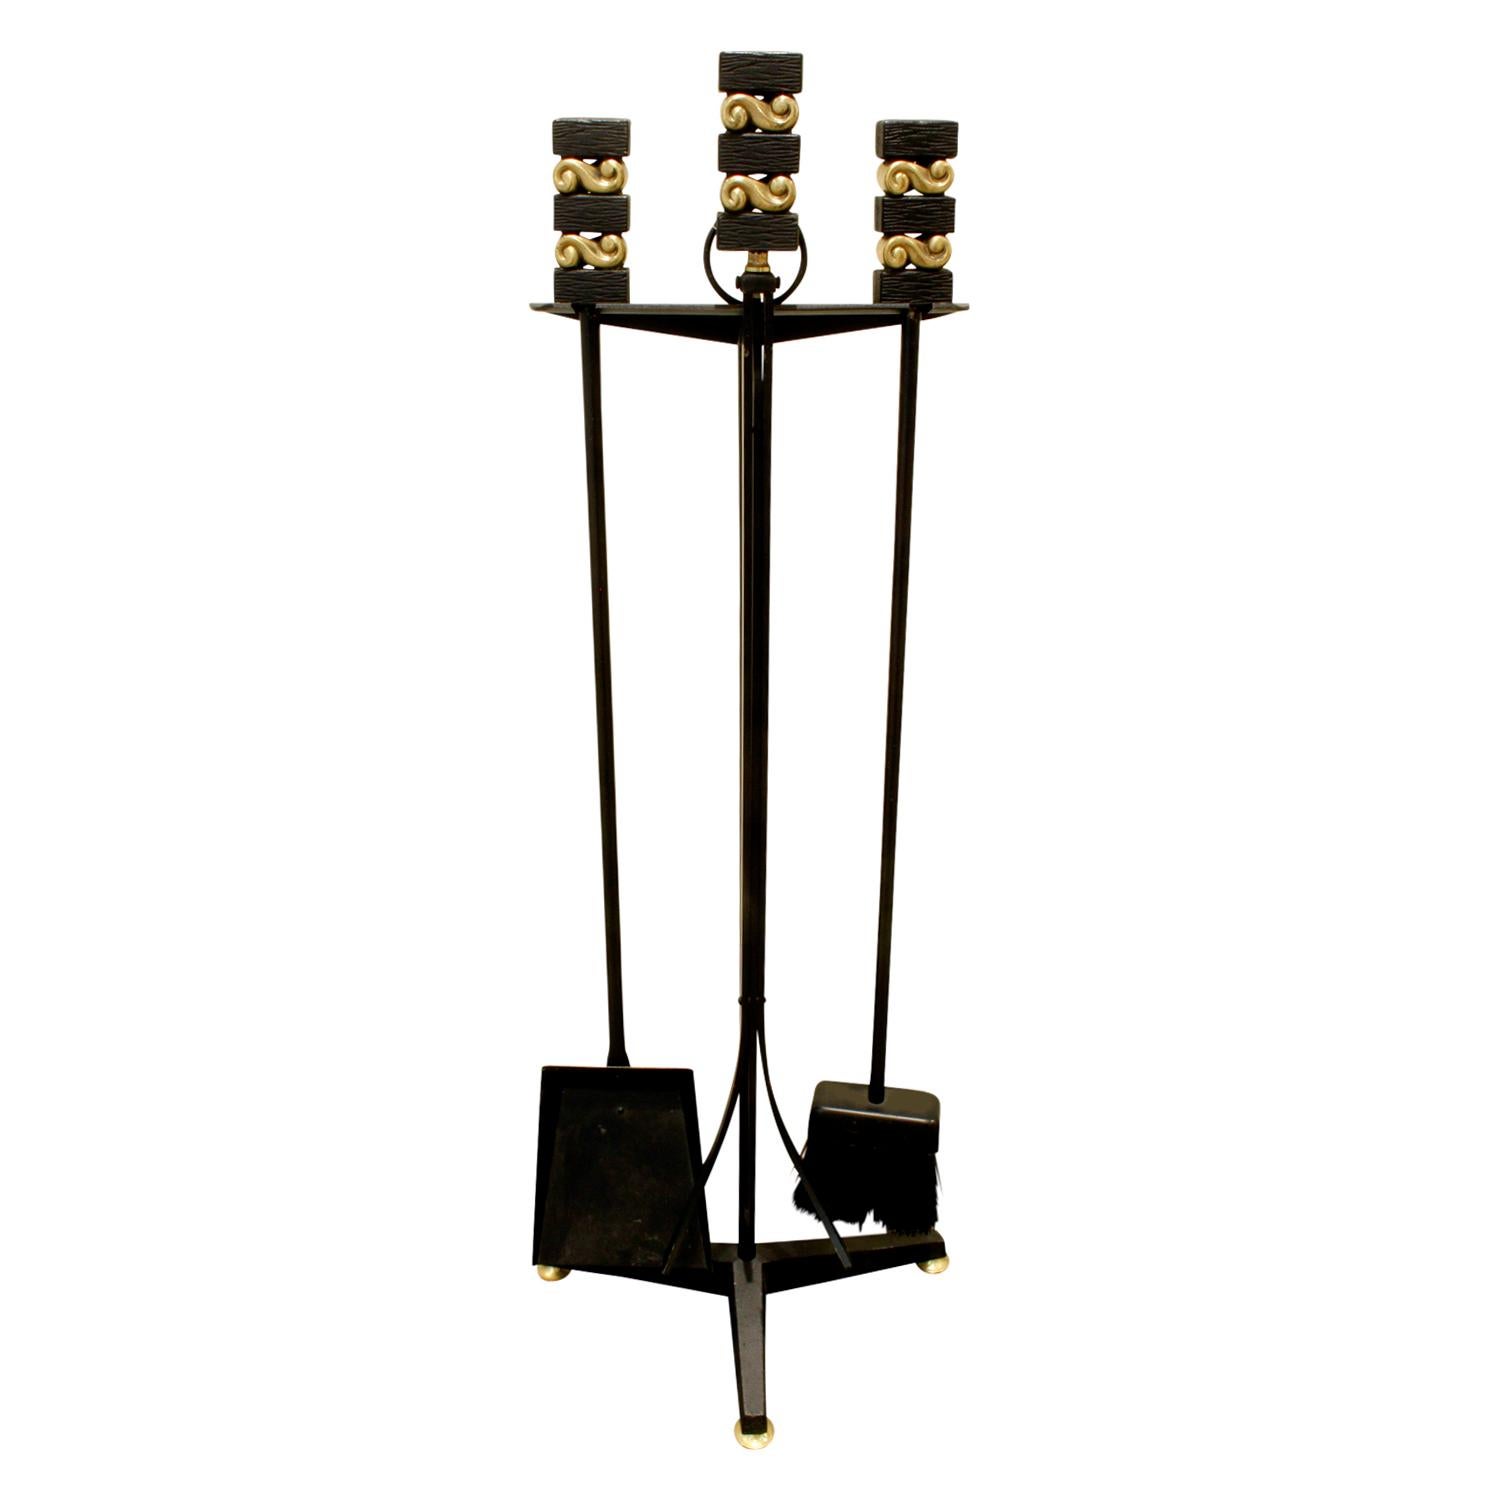 Donald Deskey Fireplace Tool Set in Wrought Iron and Brass, 1950s